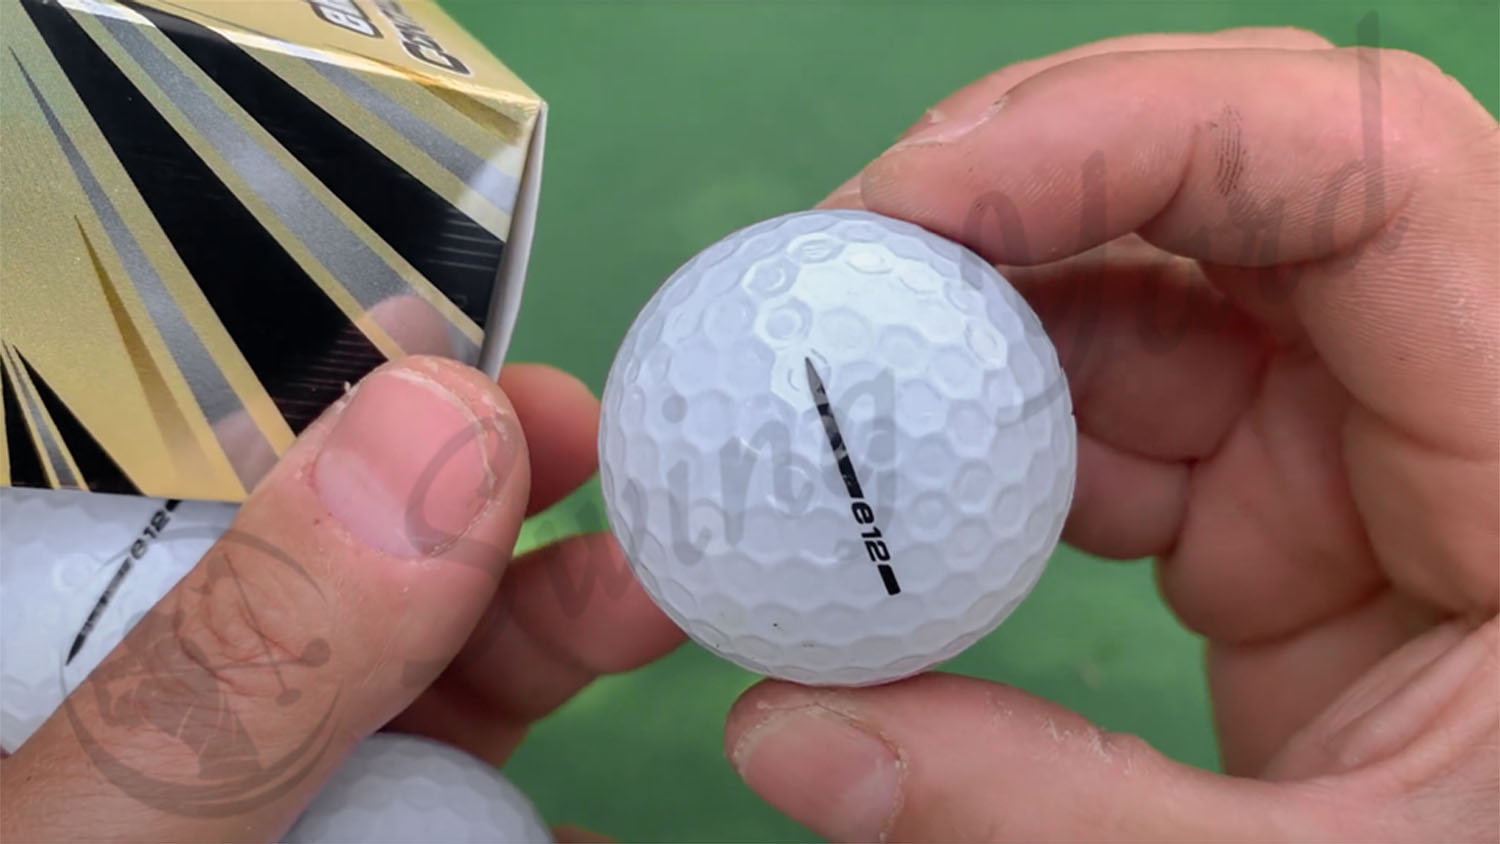 Me holding Bridgestone e12 Contact golf ball for testing at the golf course